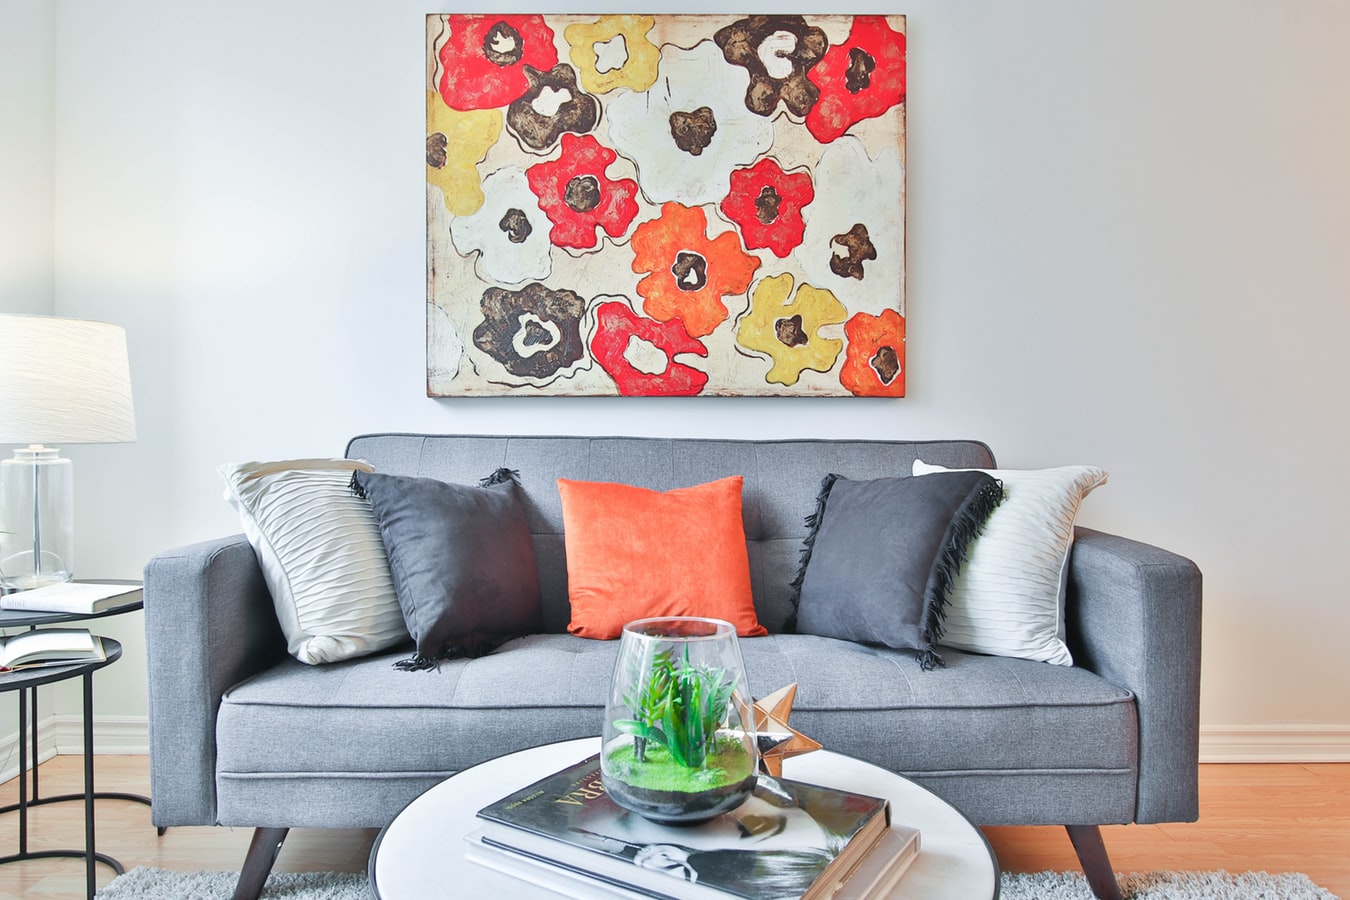 5 Ways To Be More Expressive With Your Home Decor – Uncustomary